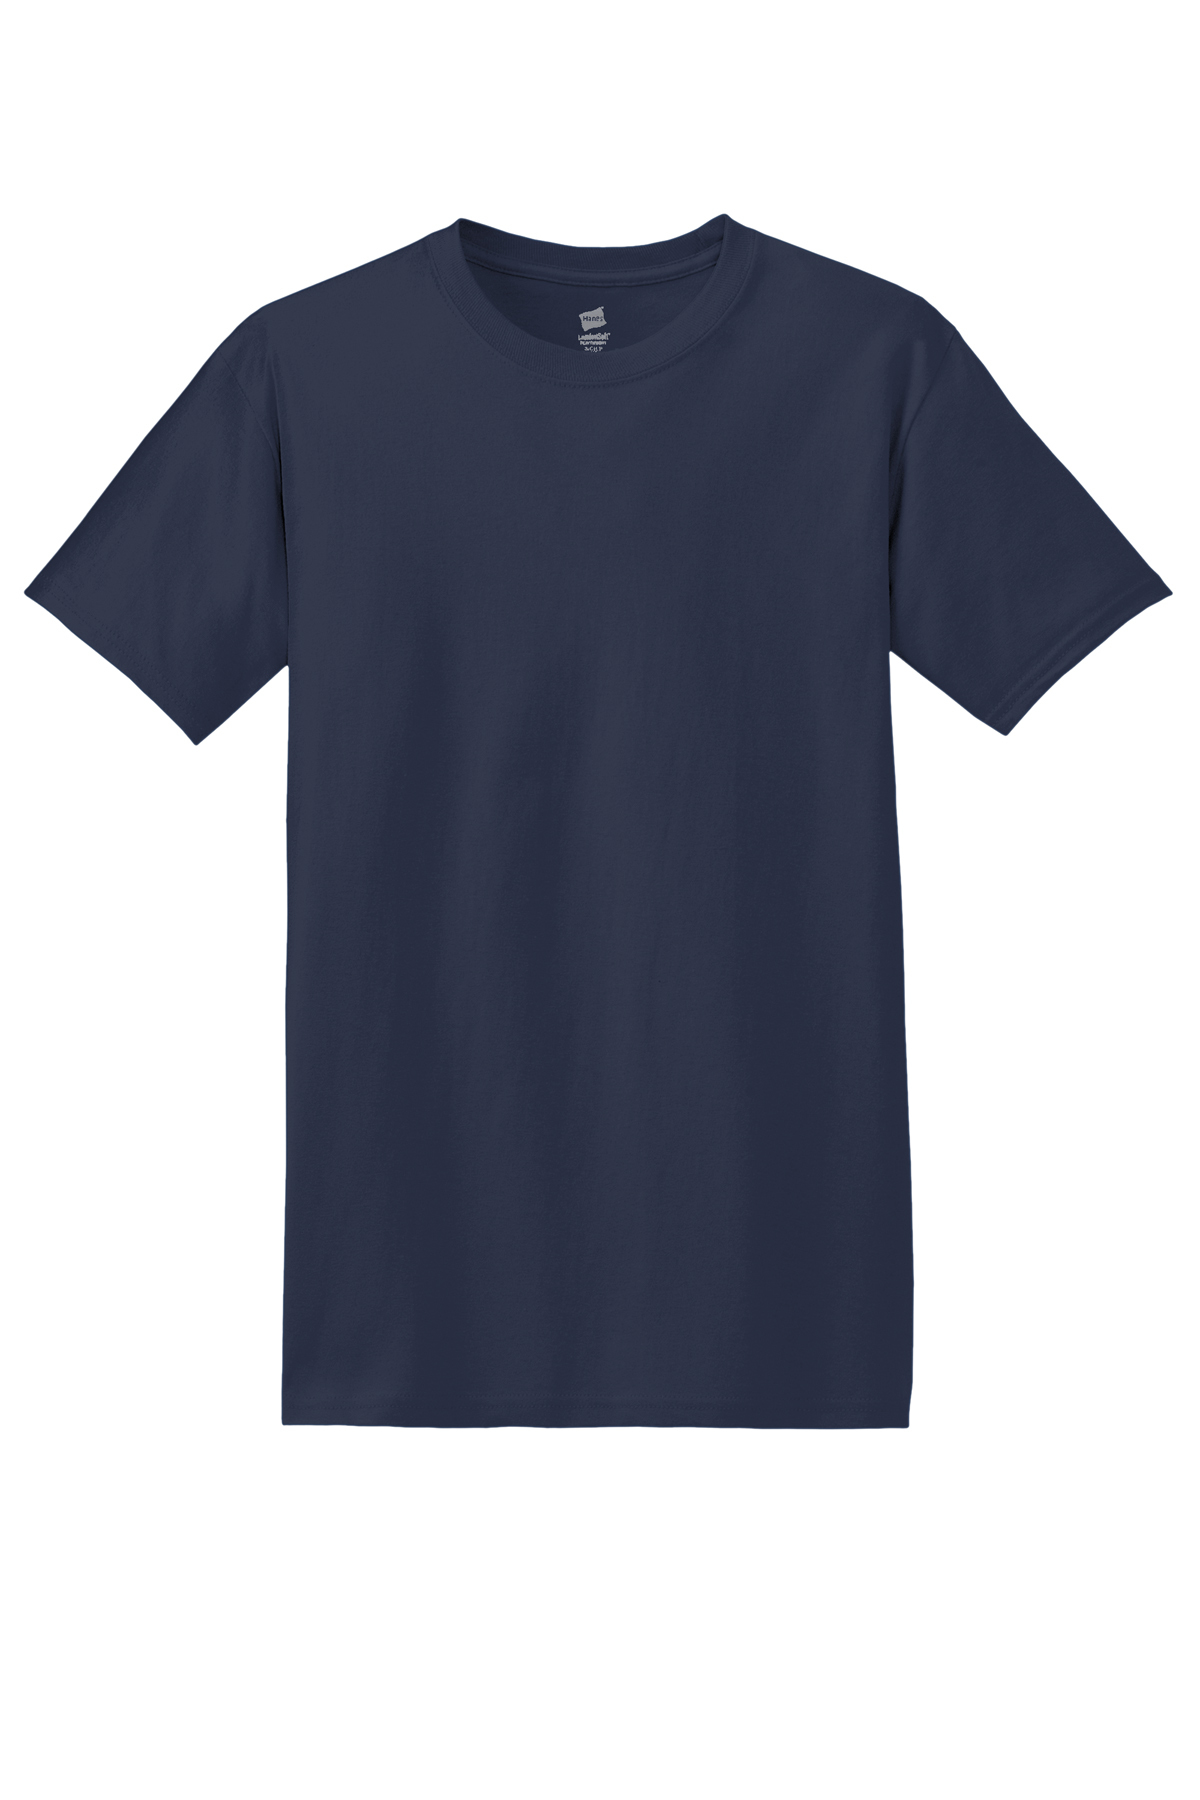 Hanes - Essential-T 100% Cotton T-Shirt | Product | Company Casuals